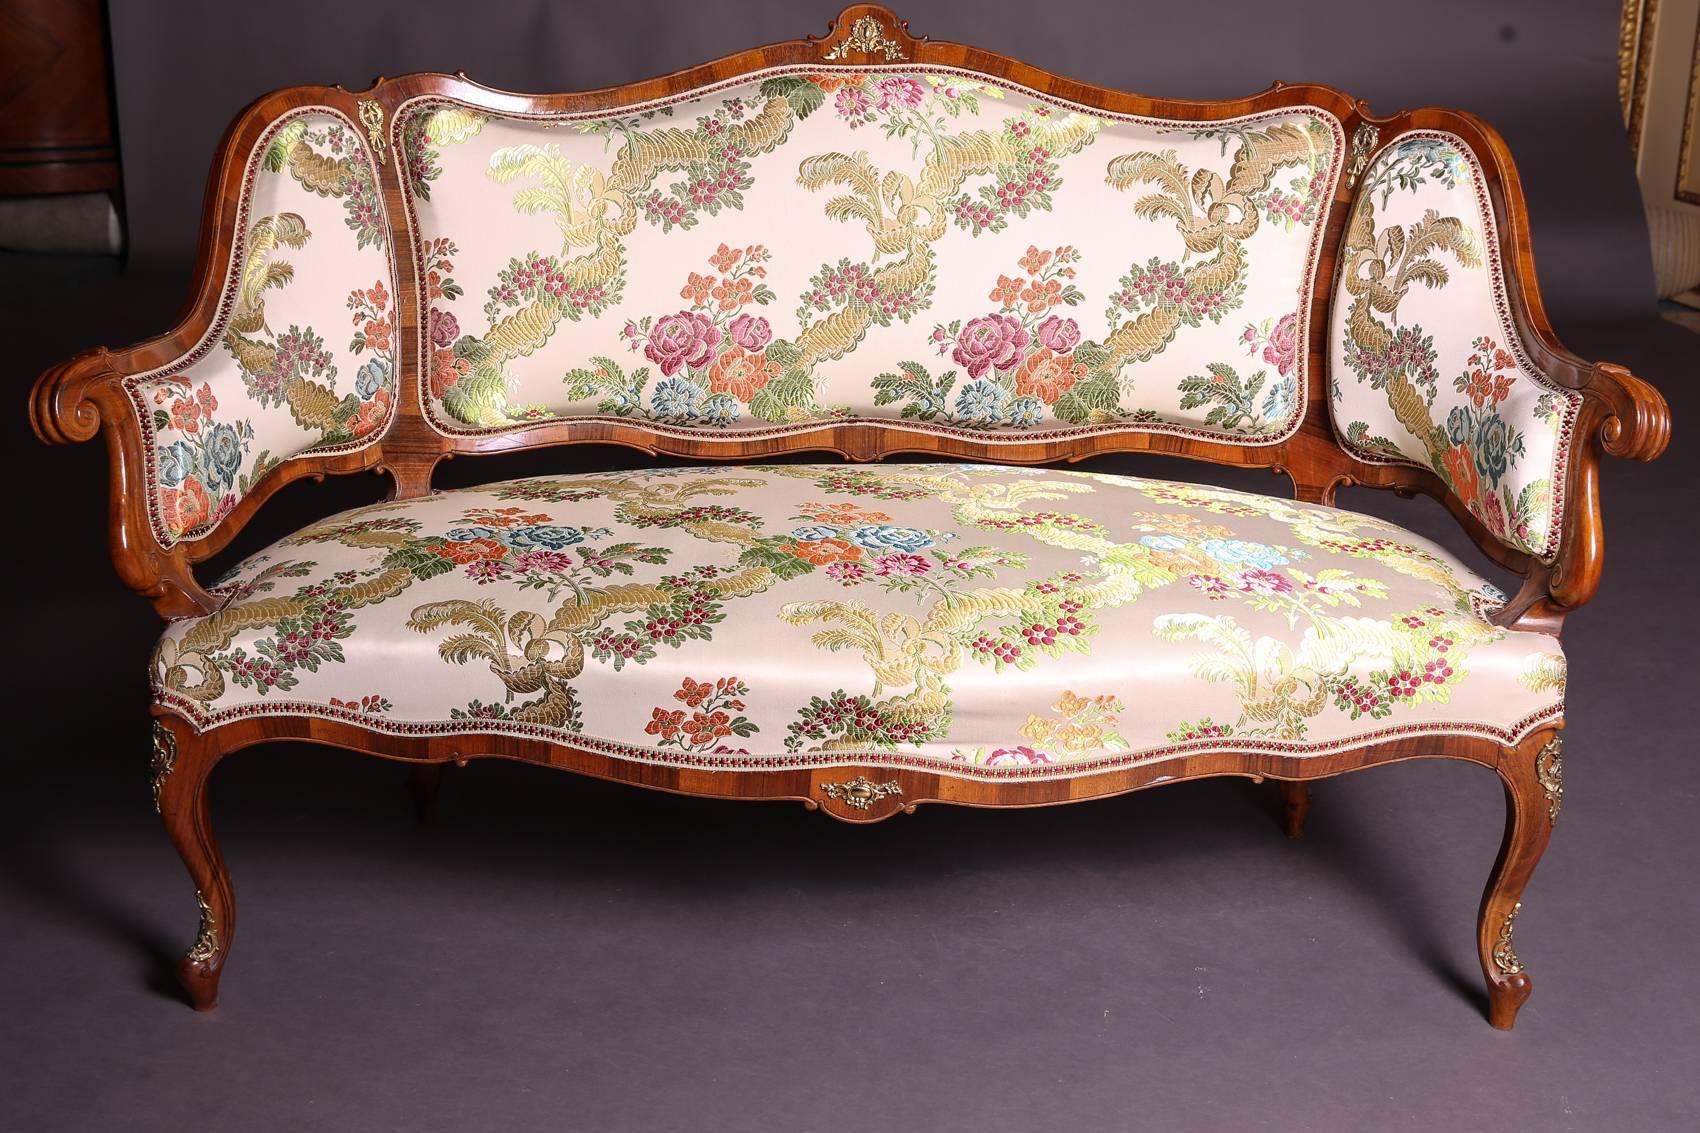 Four chairs with a sofa in Dresden baroque style. Walnut freed and felted. Rich gilded bronze appliqués, on the backs with perimeter bar contours. Saxony, circa 1880-1890.

Dimensions:
Canapé: H 92 cm, W 149 cm, D 77
Chair: H 93 cm, W 45 cm, D